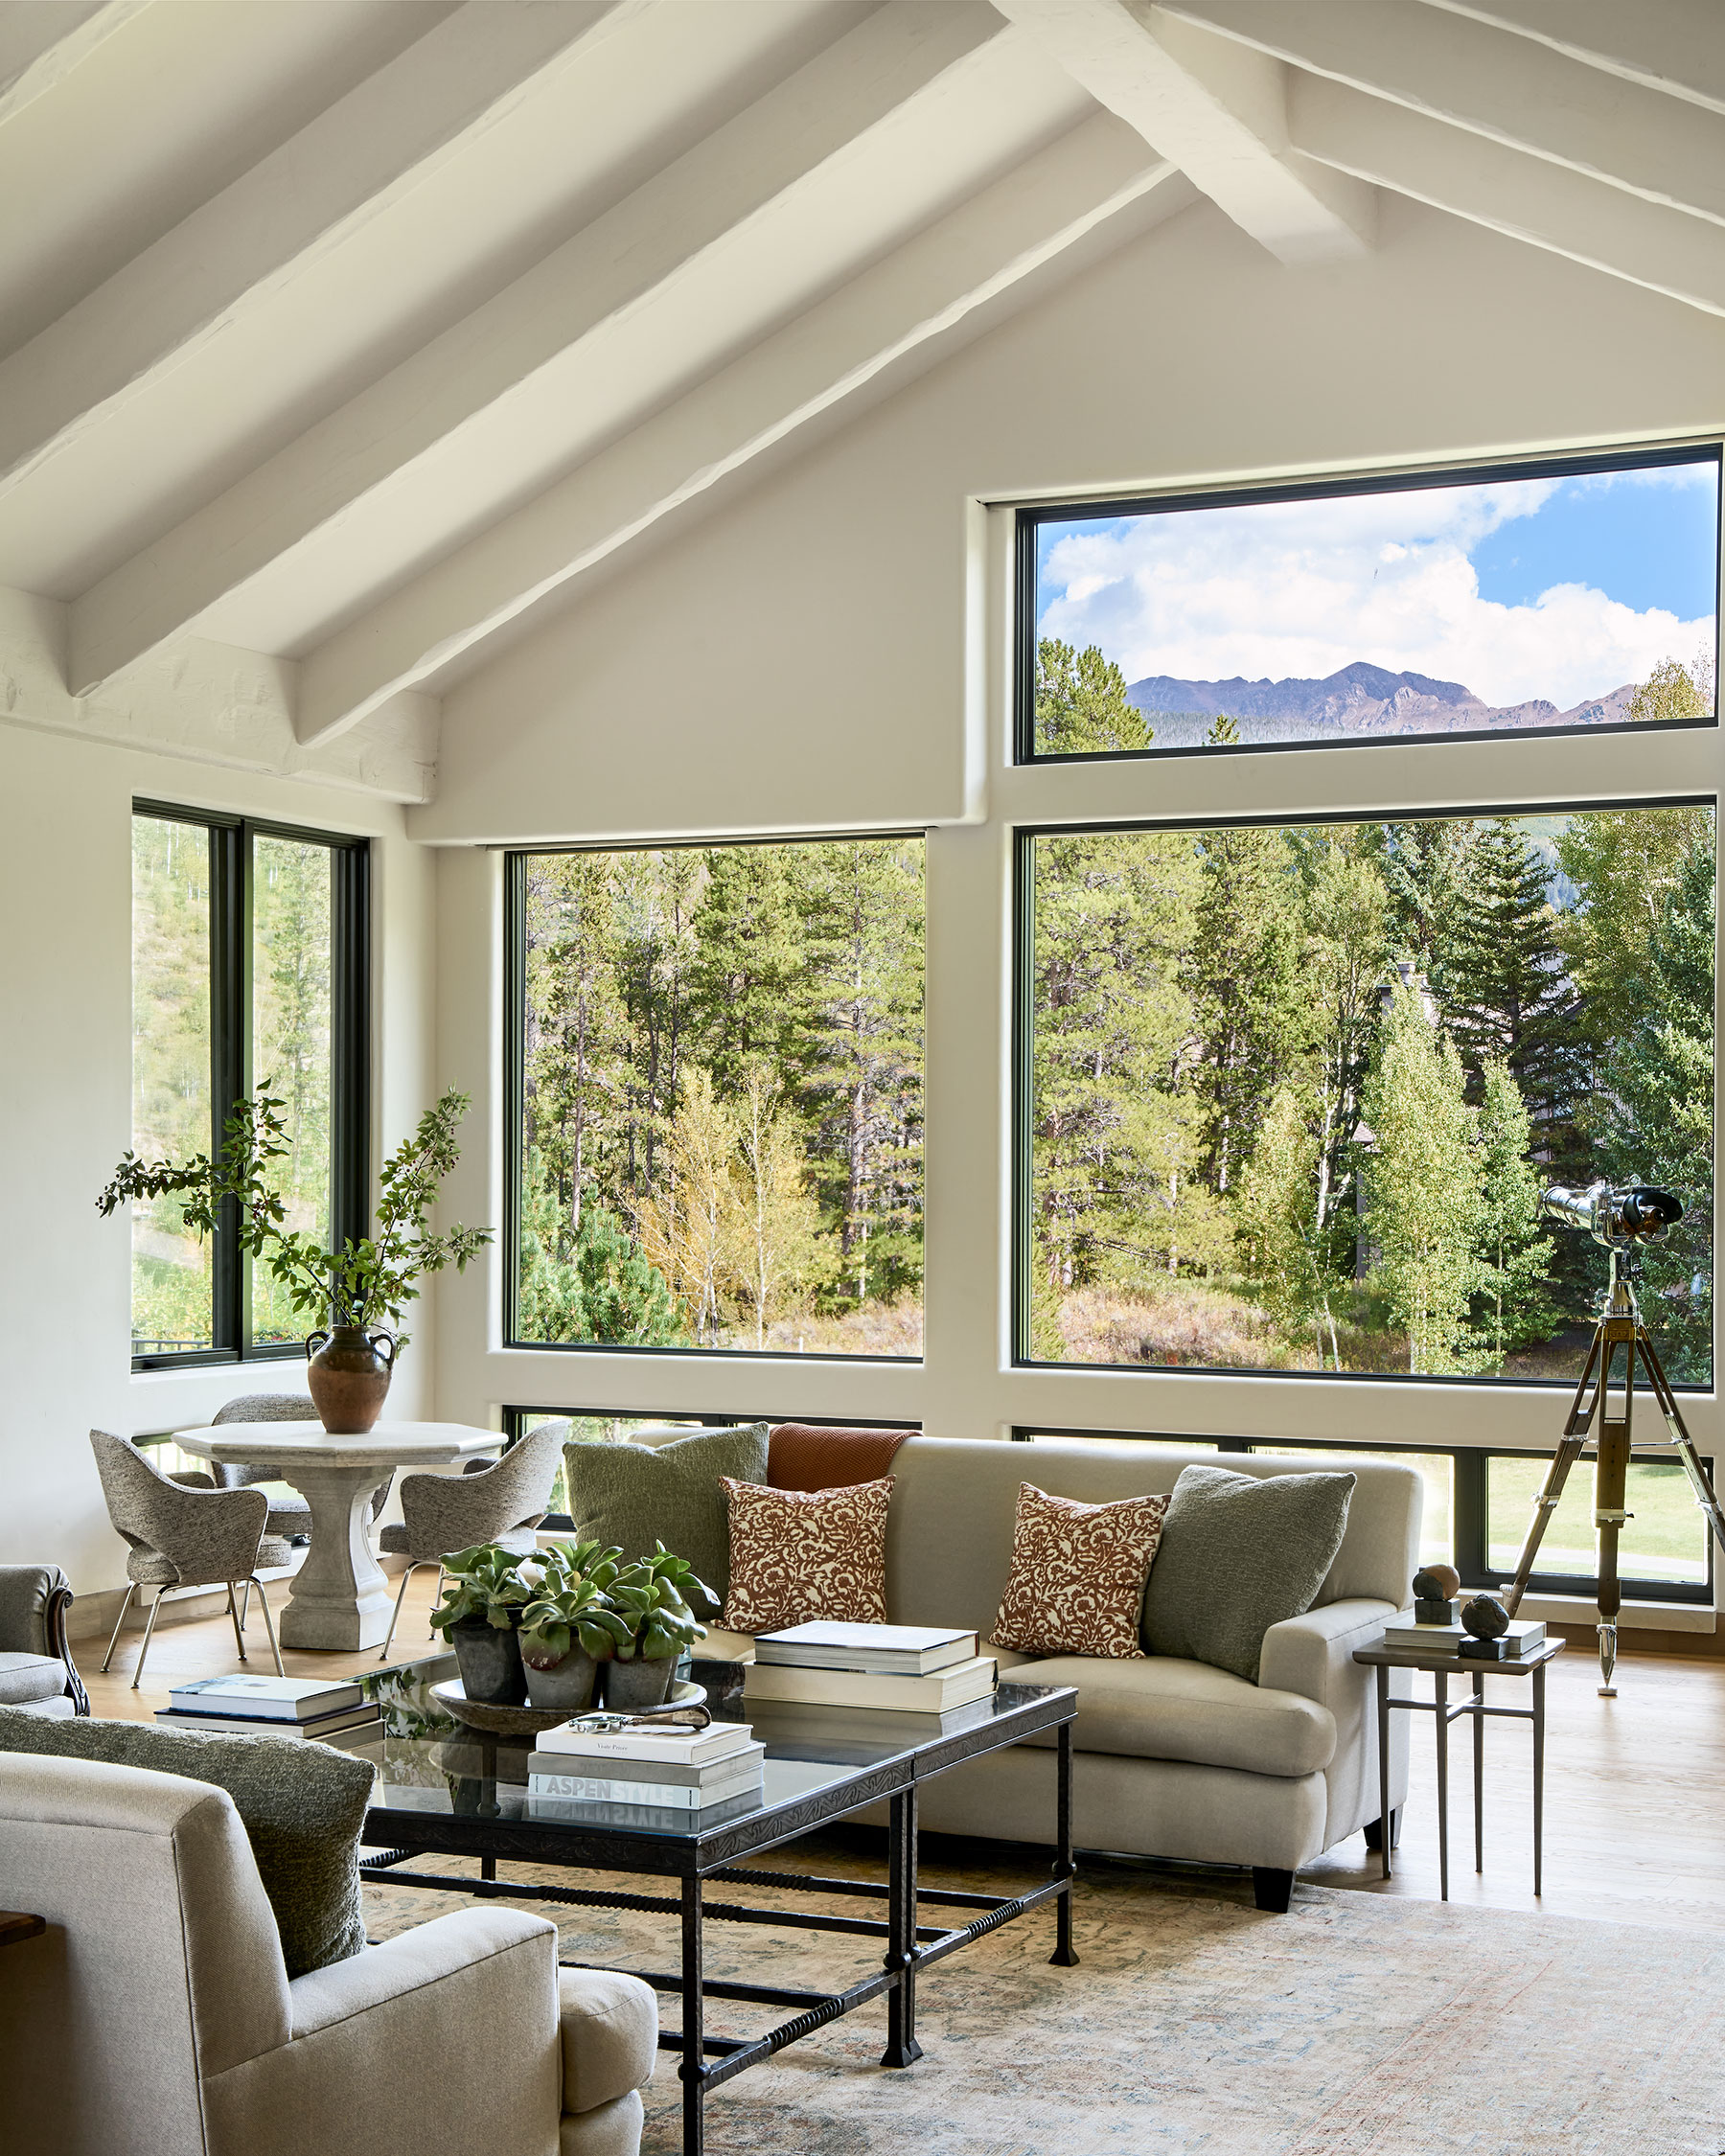 Furnished living room overlooking pine trees and mountains